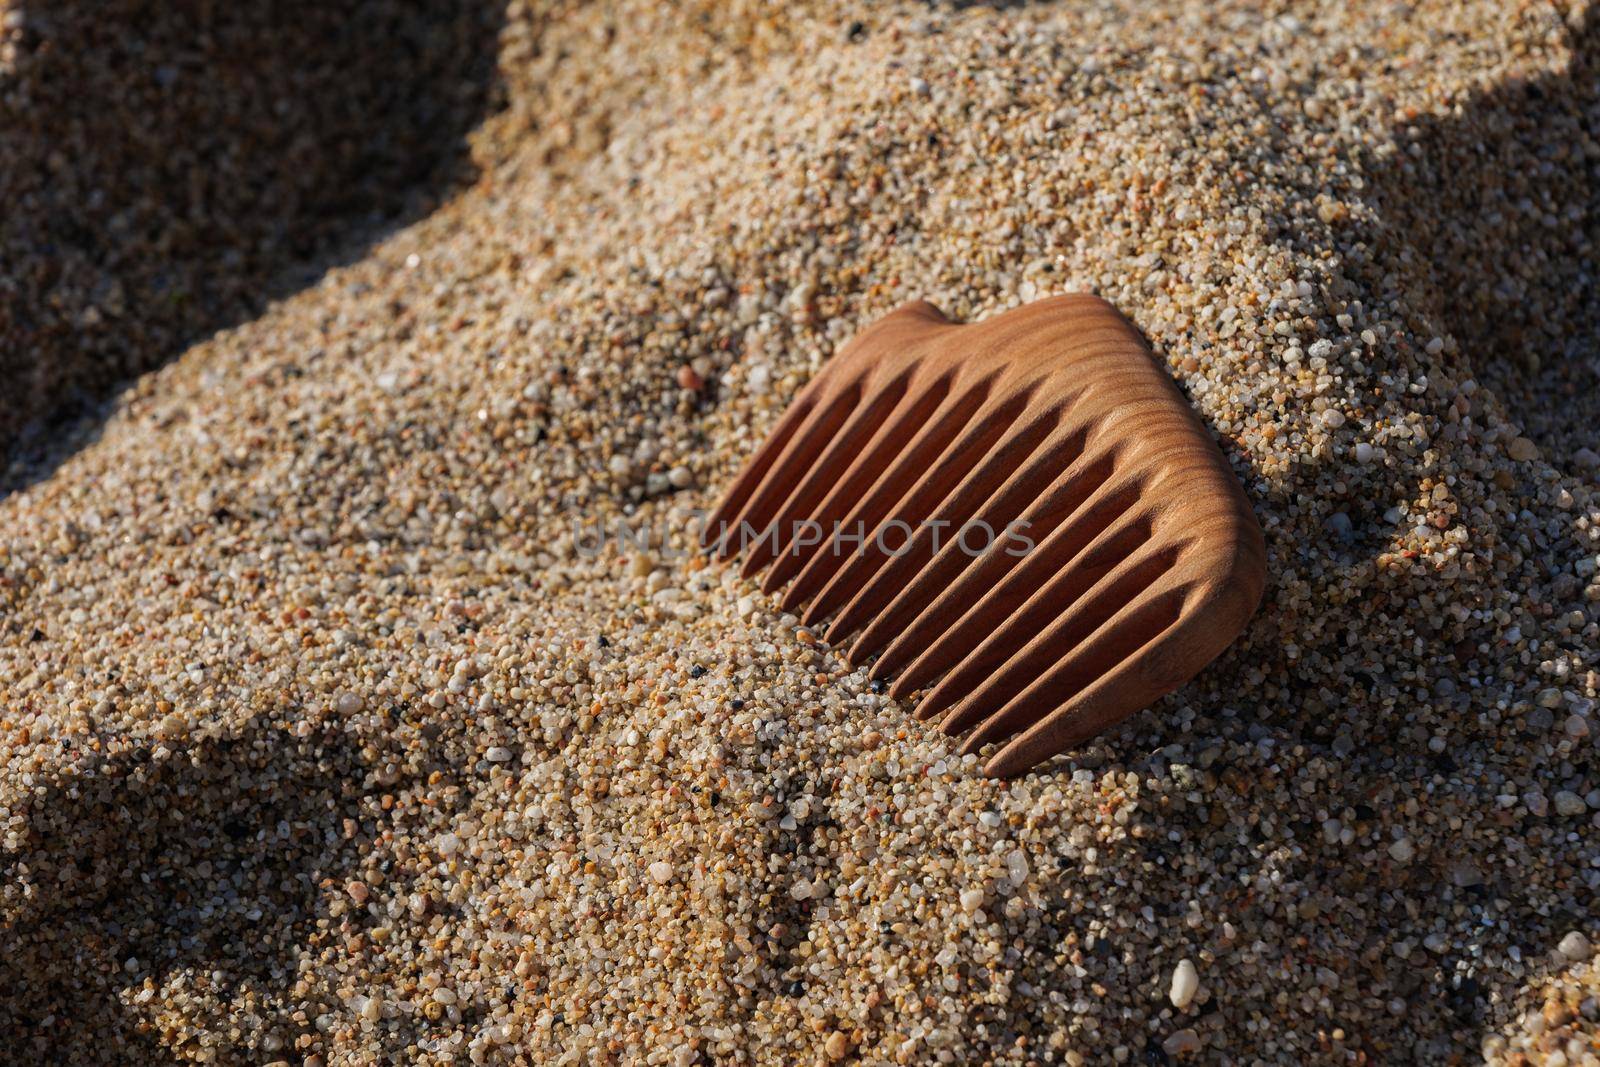 Handmade wooden comb on sand at the beach. Used for head massage and combing. Hair care concept